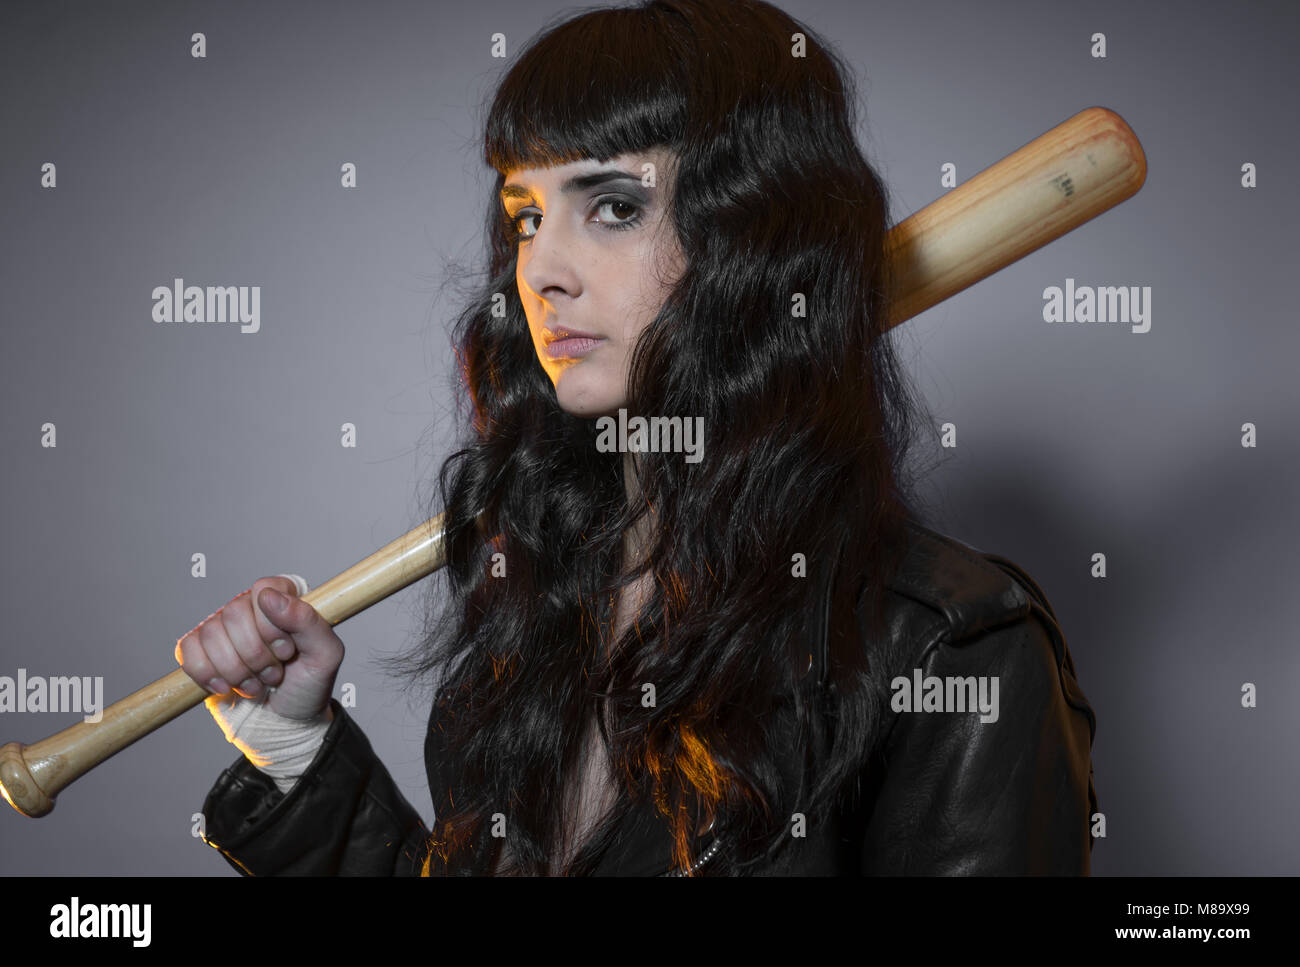 custody, adolescence and delinquency, brunette woman in leather jacket and baseball bat with challenging aptitude Stock Photo